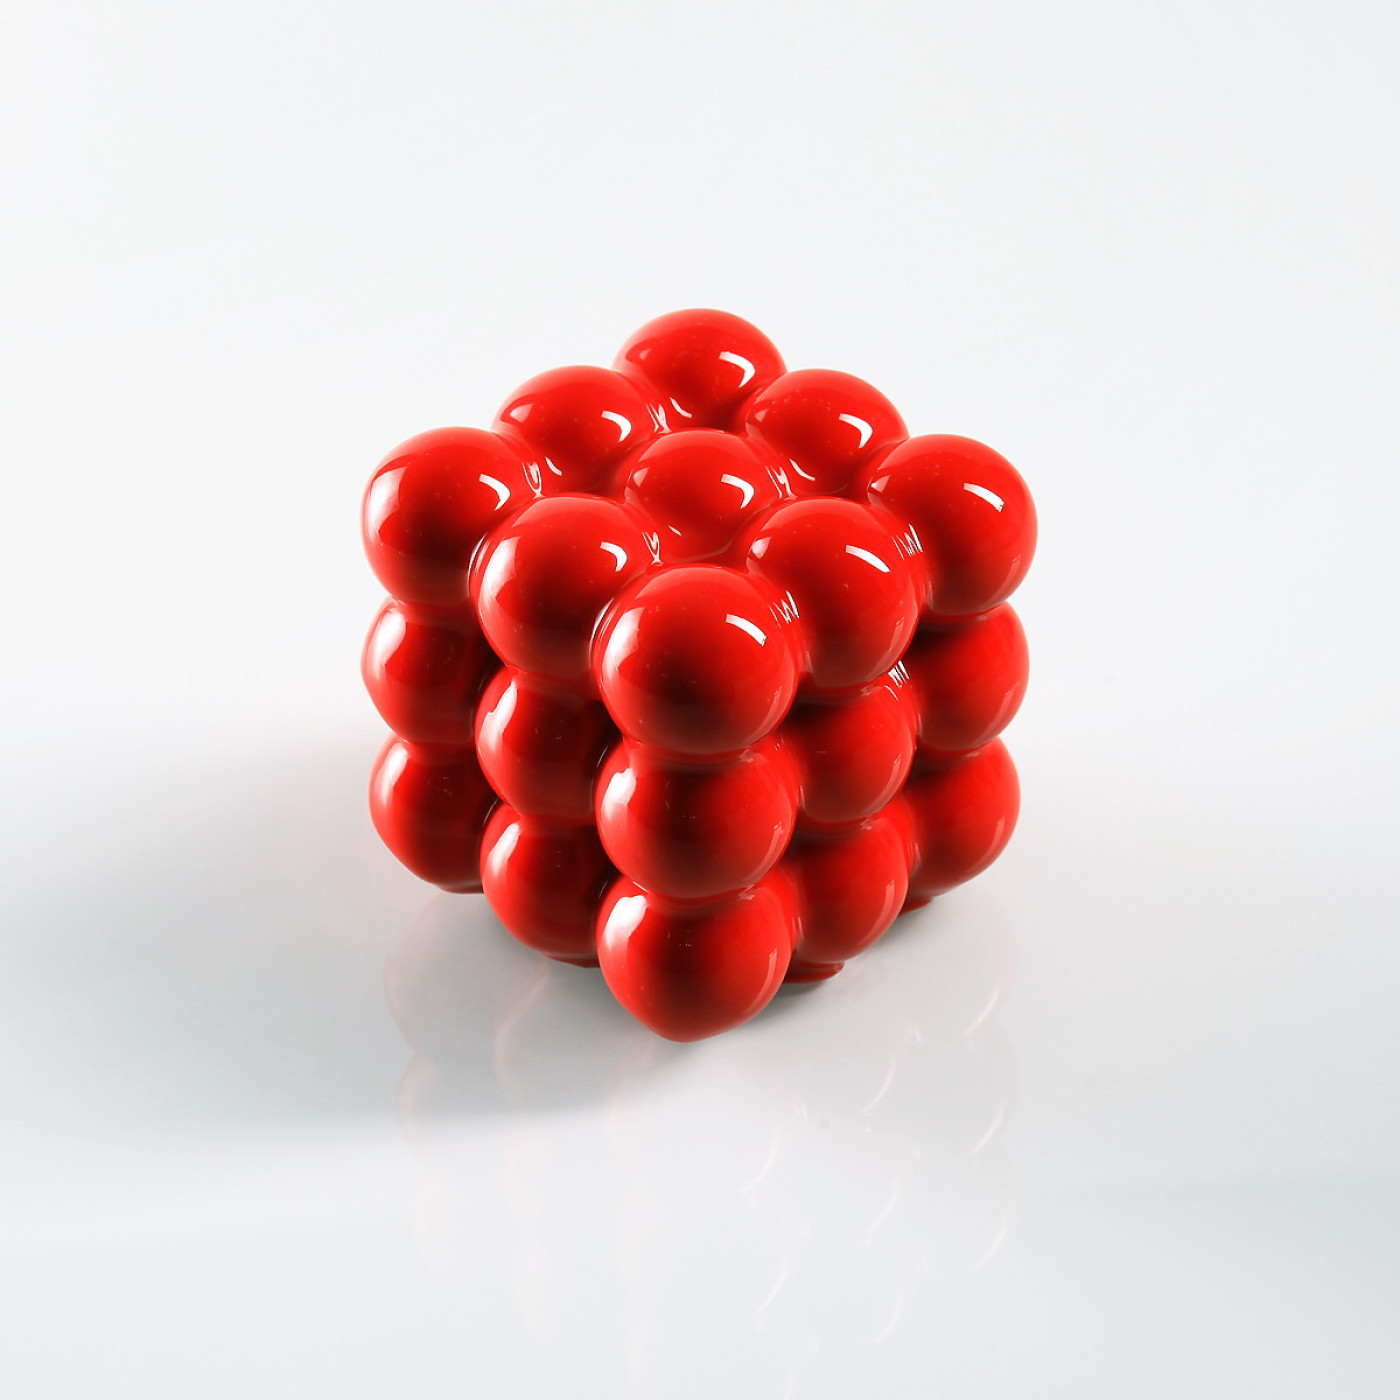 3x3x3 spheres from the series Geometric desserts